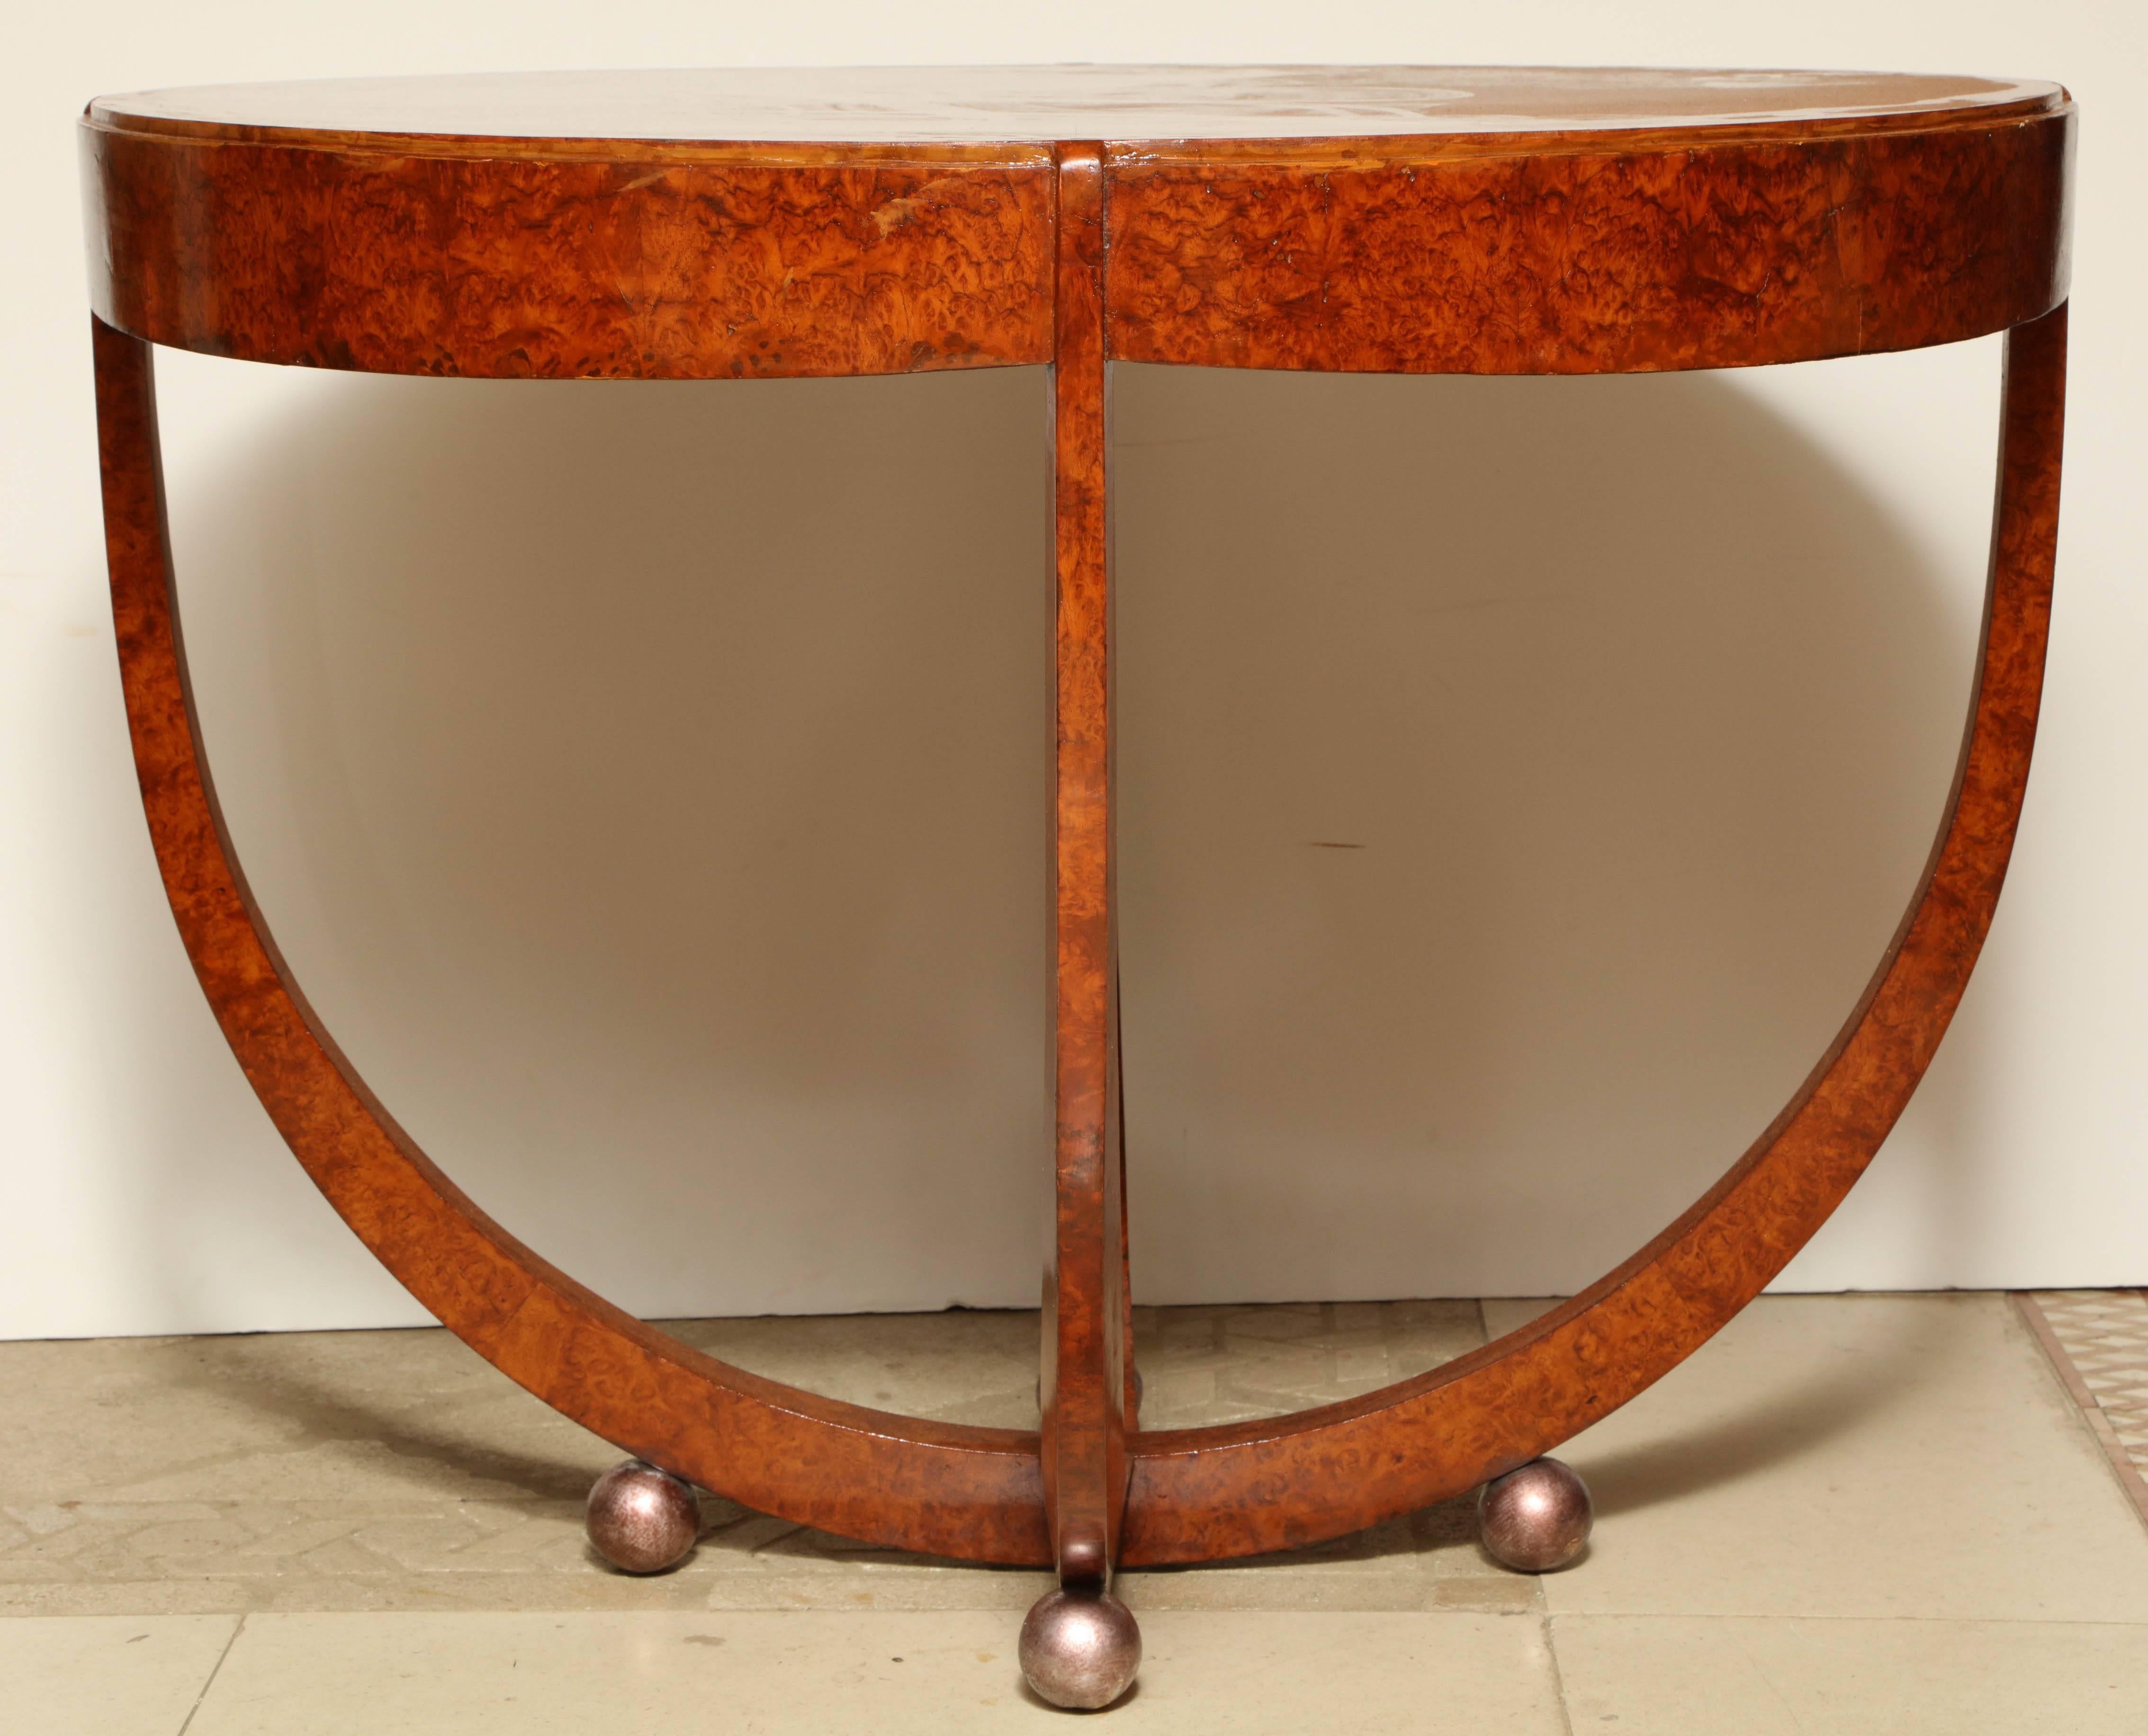 An unusual Art Deco burl inlaid round center table with unusual floating base on ball feet.